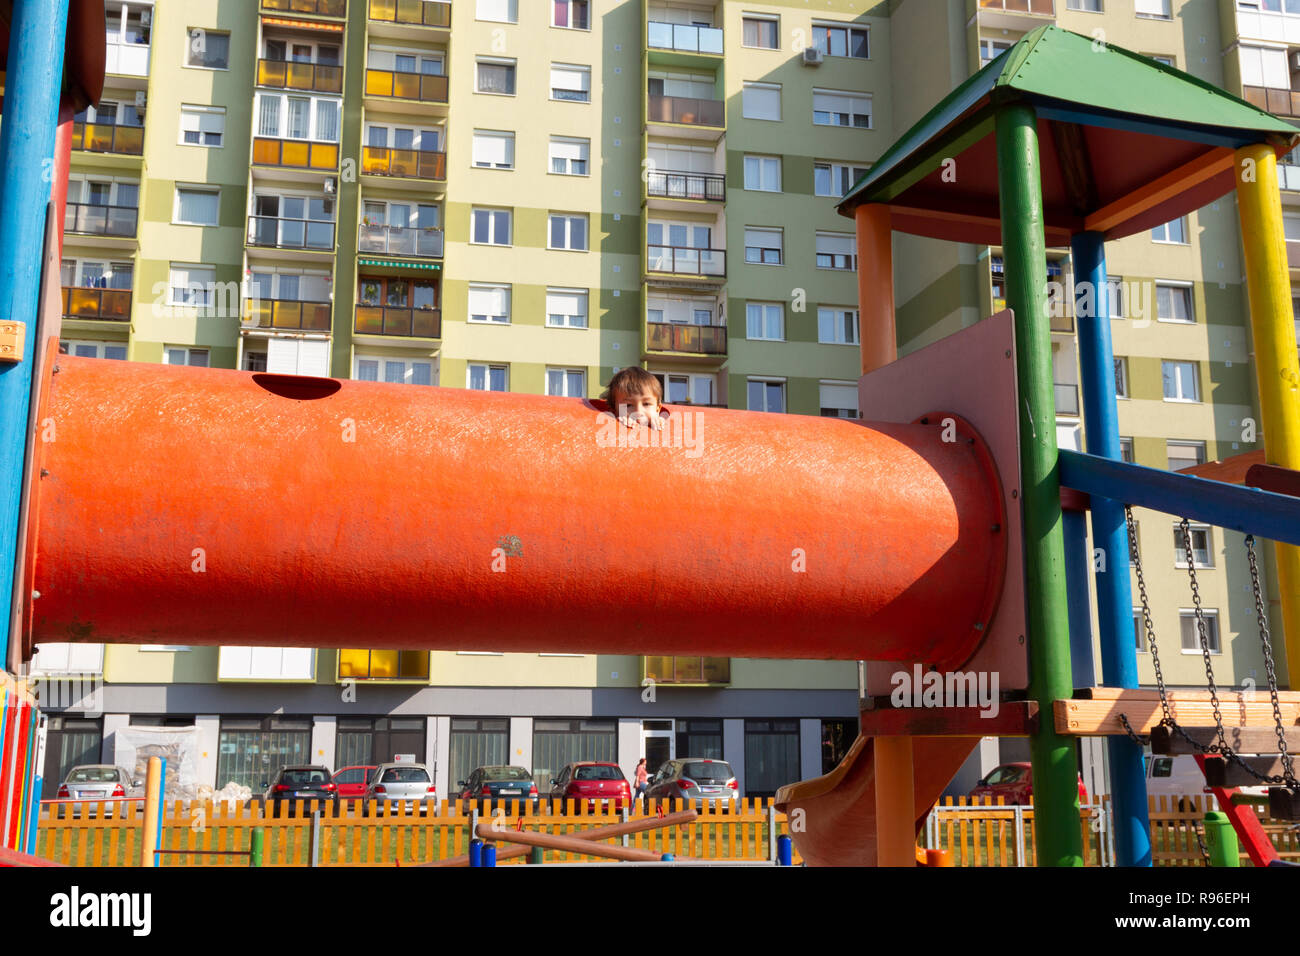 Boy child at playground peeping out of the hole of a big orange toy tube. Stock Photo